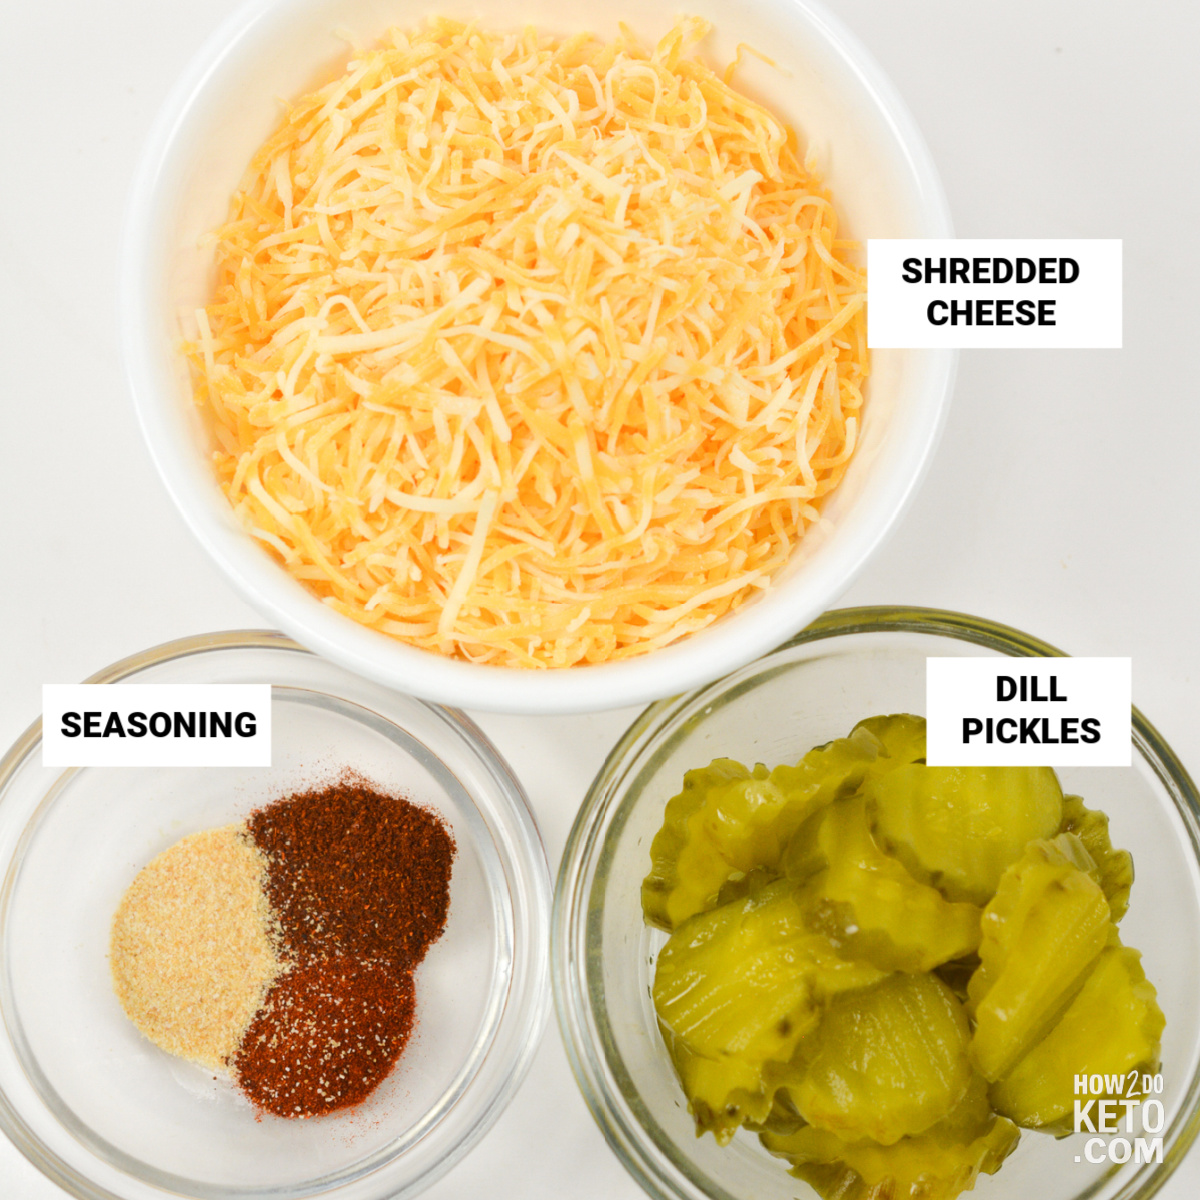 Keto Cheesy Pickle Chips Ingredients, with overlay: shredded cheese, seasoning, dill pickles